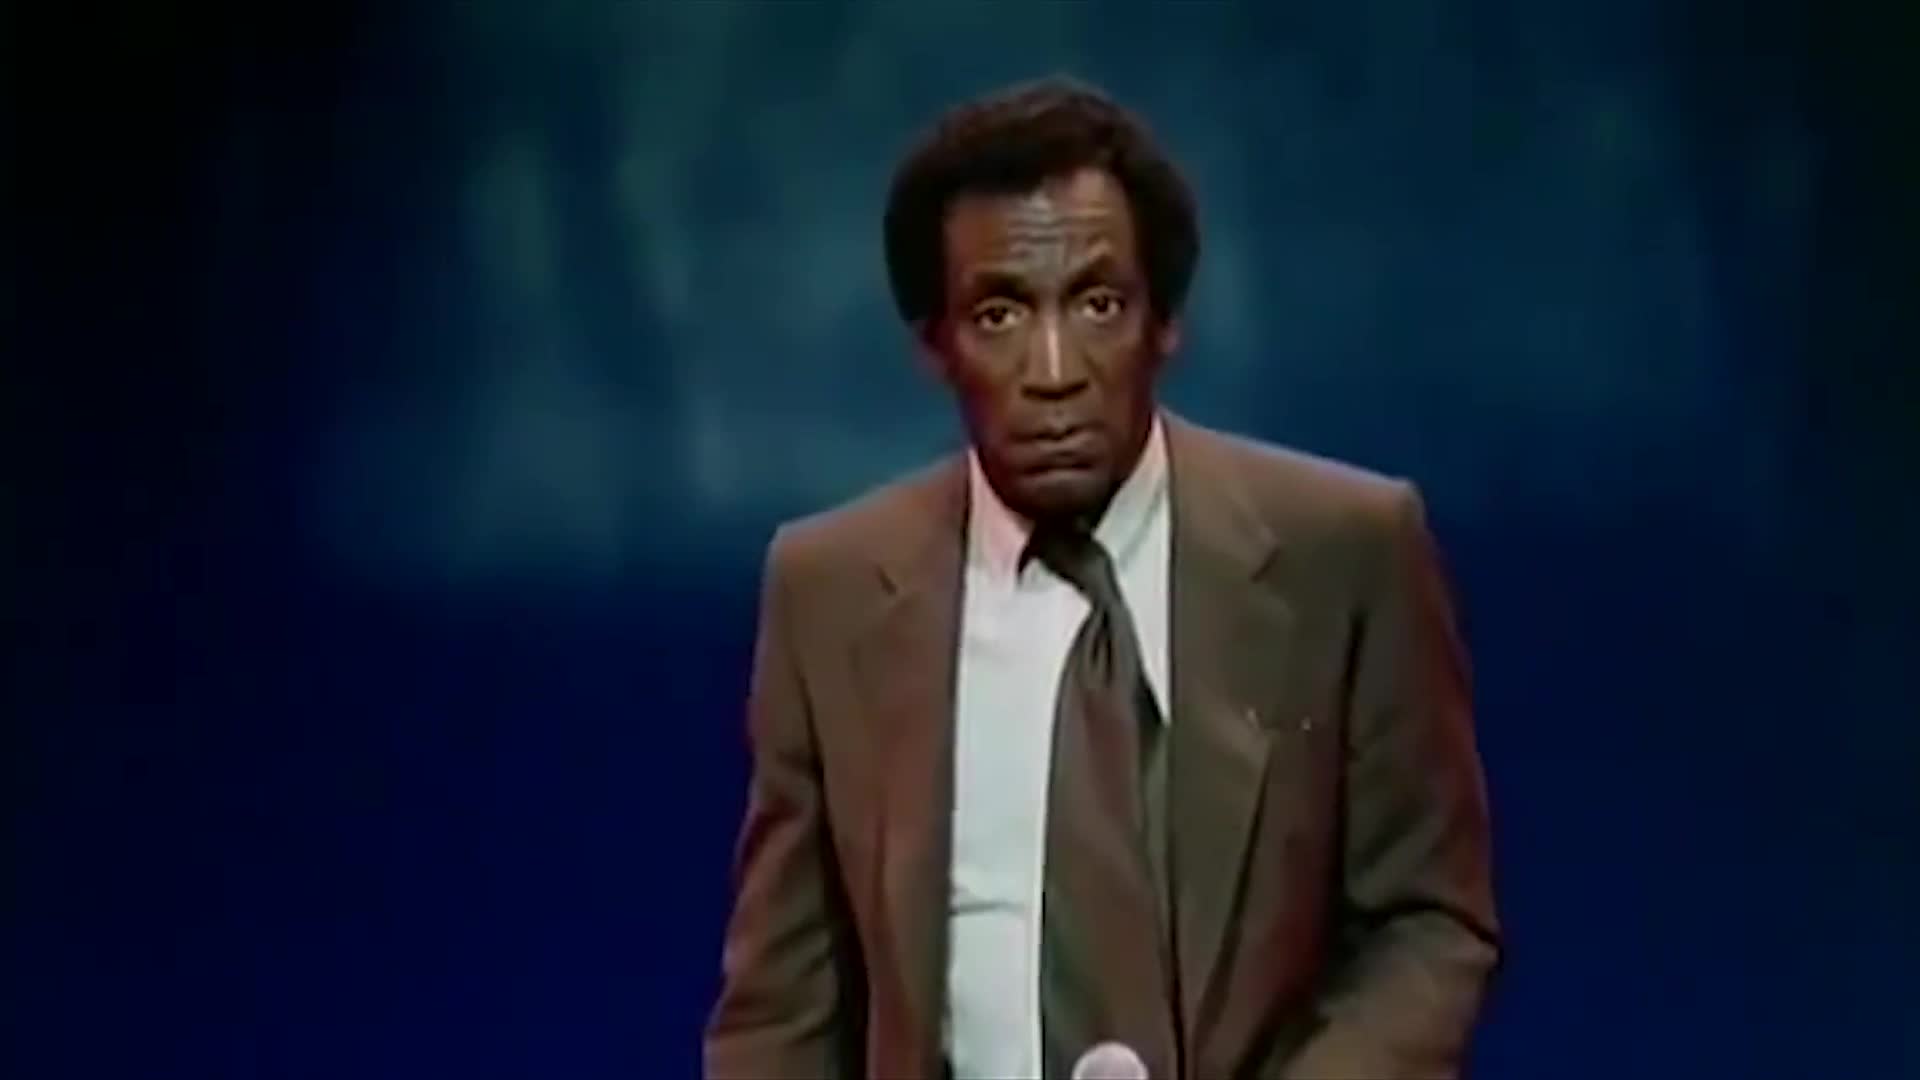 Watch Bill Cosby’s Evolving Comedy Commentary The New Yorker